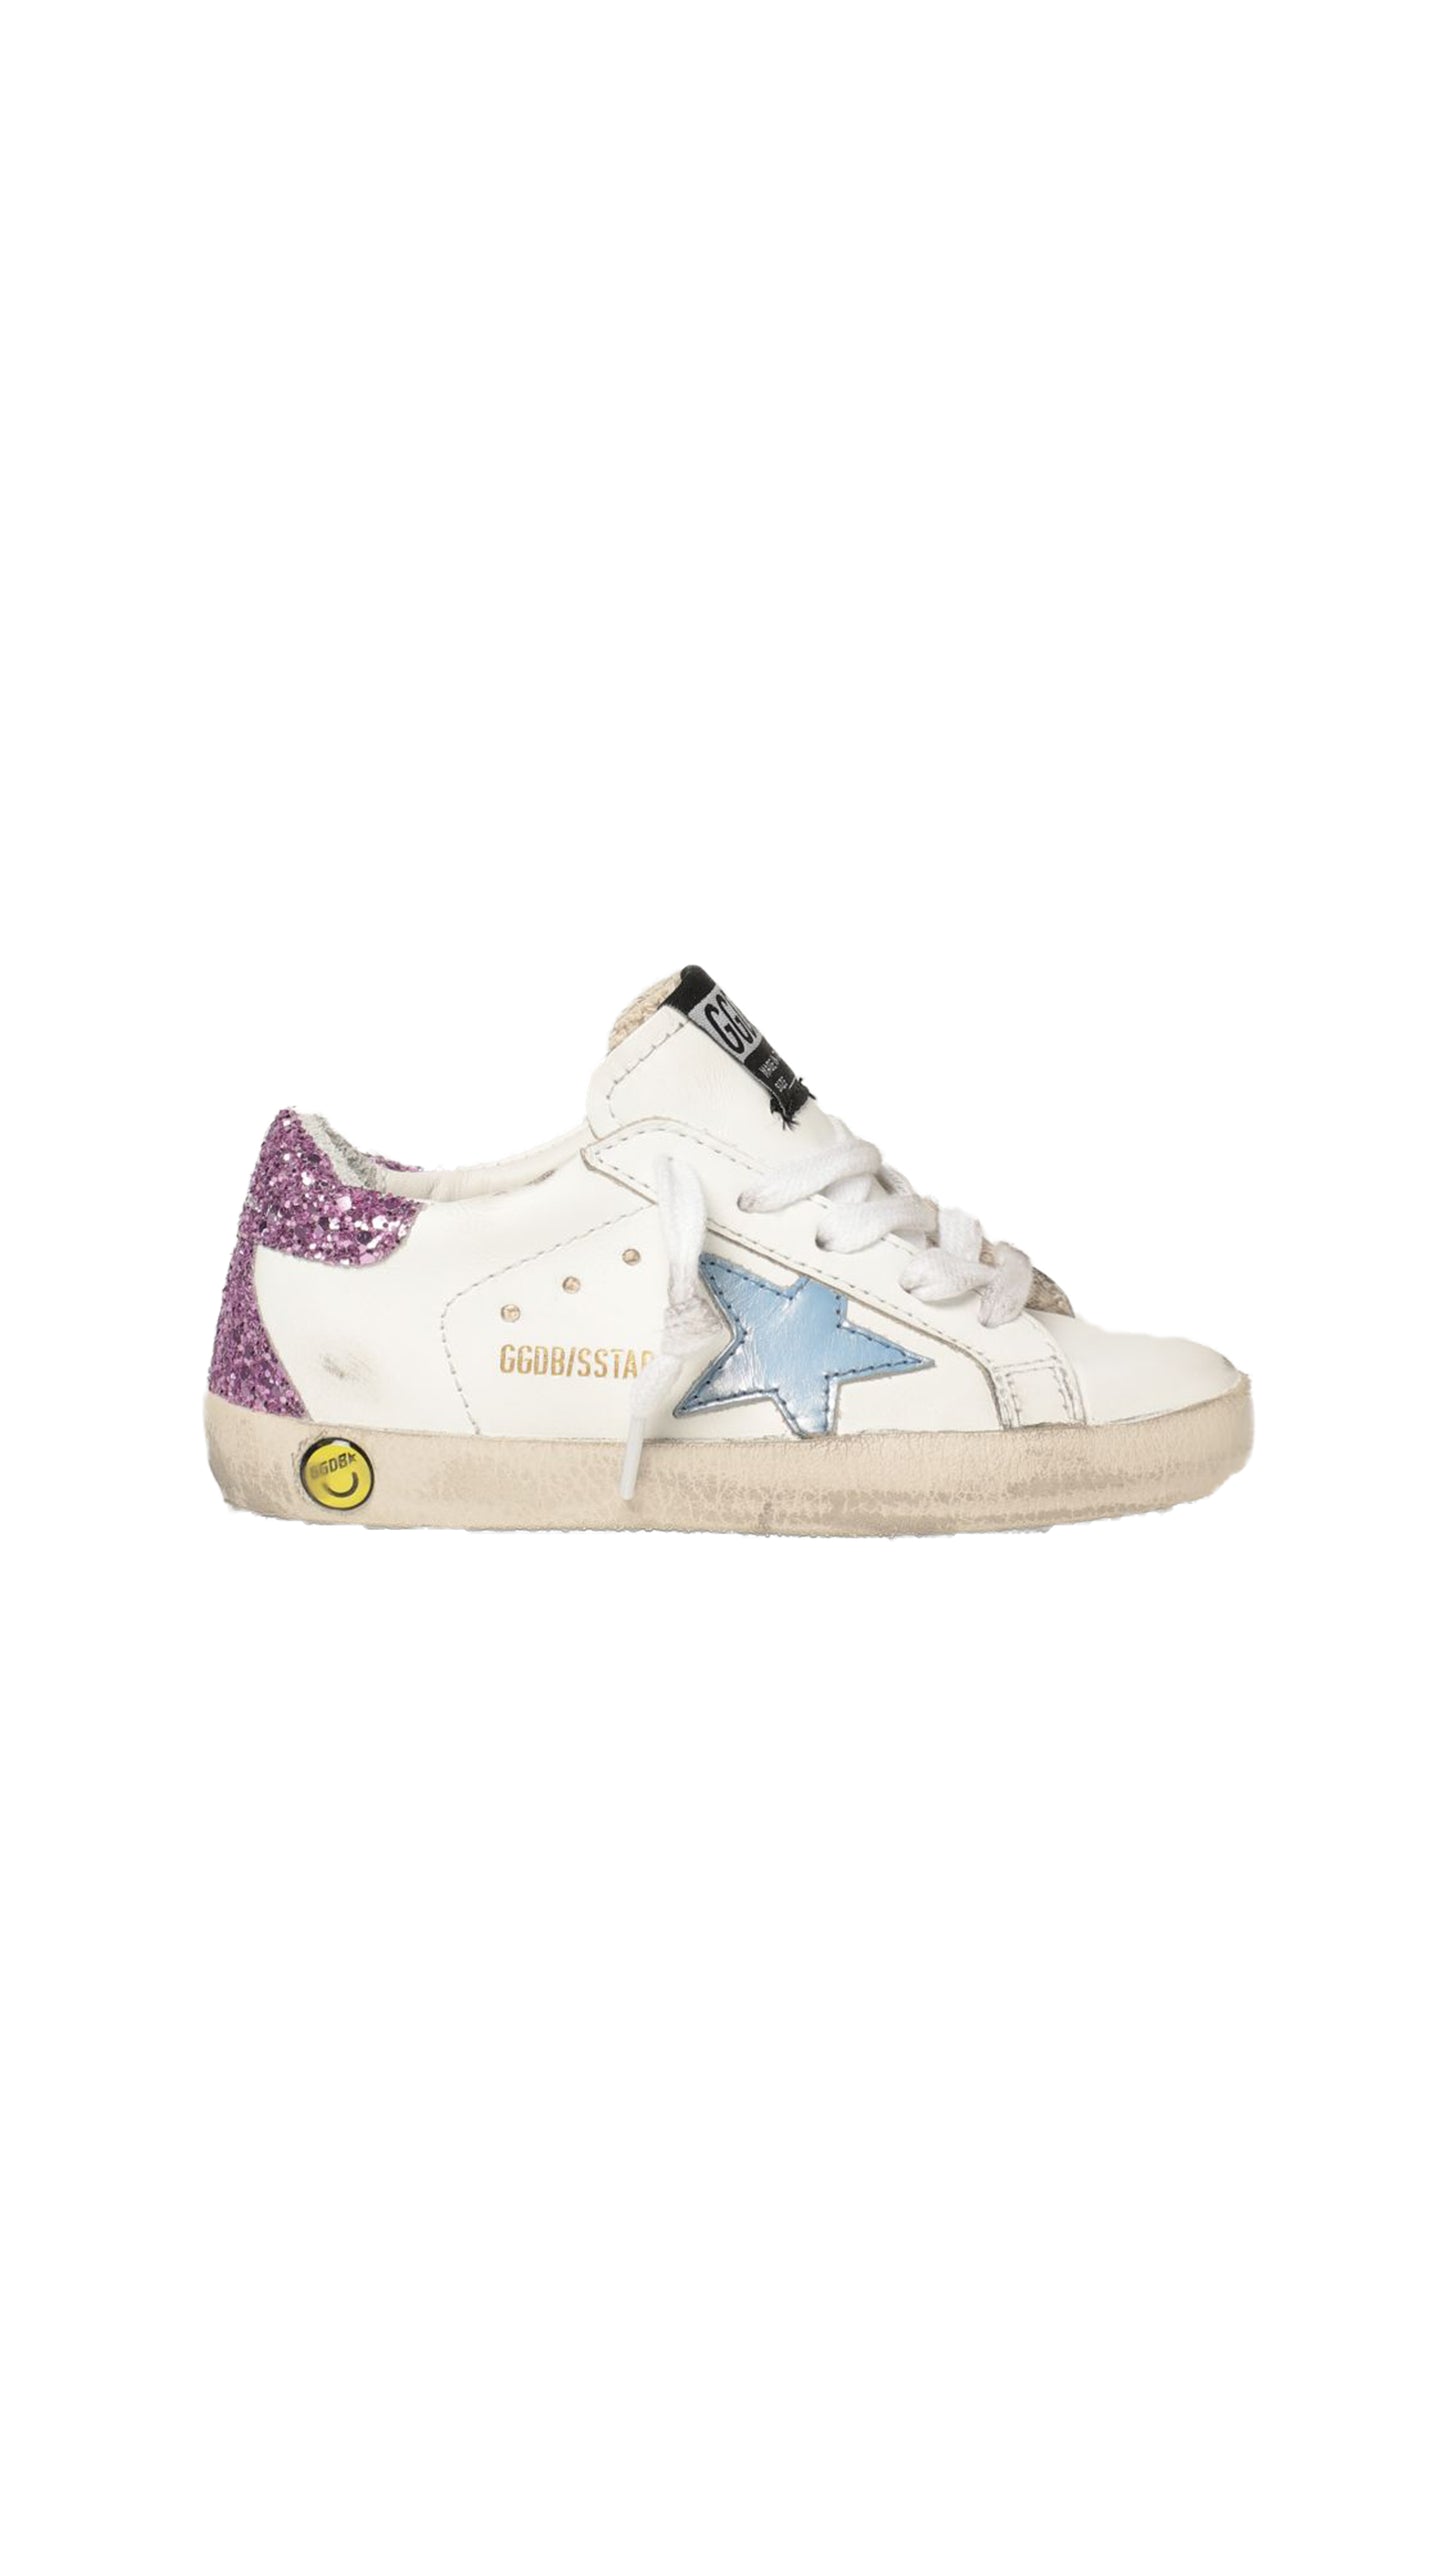 Leather Super-Star Sneakers With Glittery Heel Tab - Blue / Purple